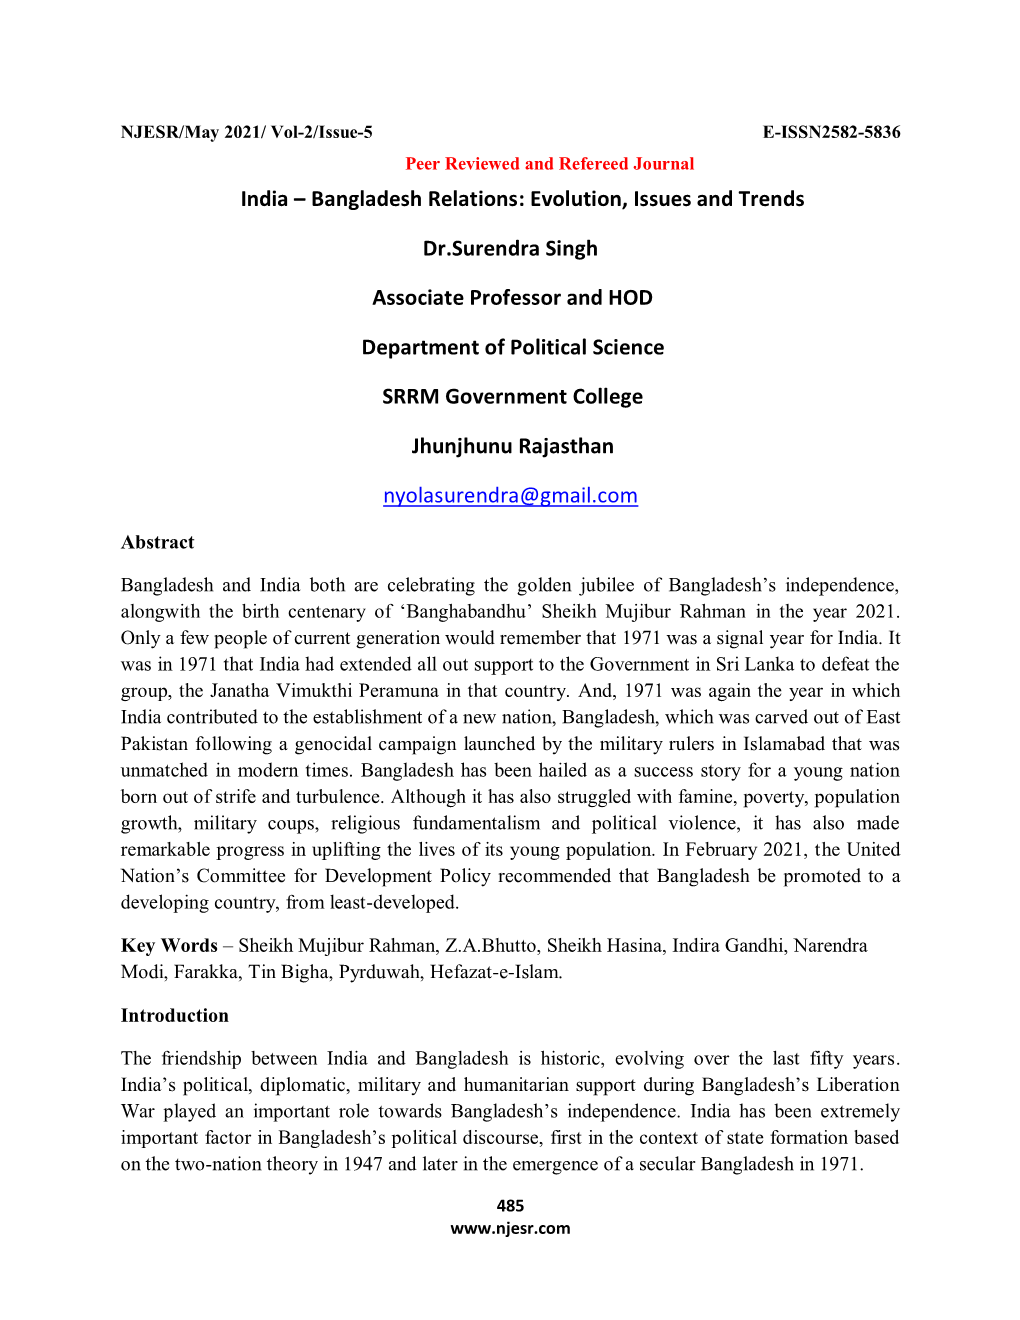 India – Bangladesh Relations: Evolution, Issues and Trends Dr